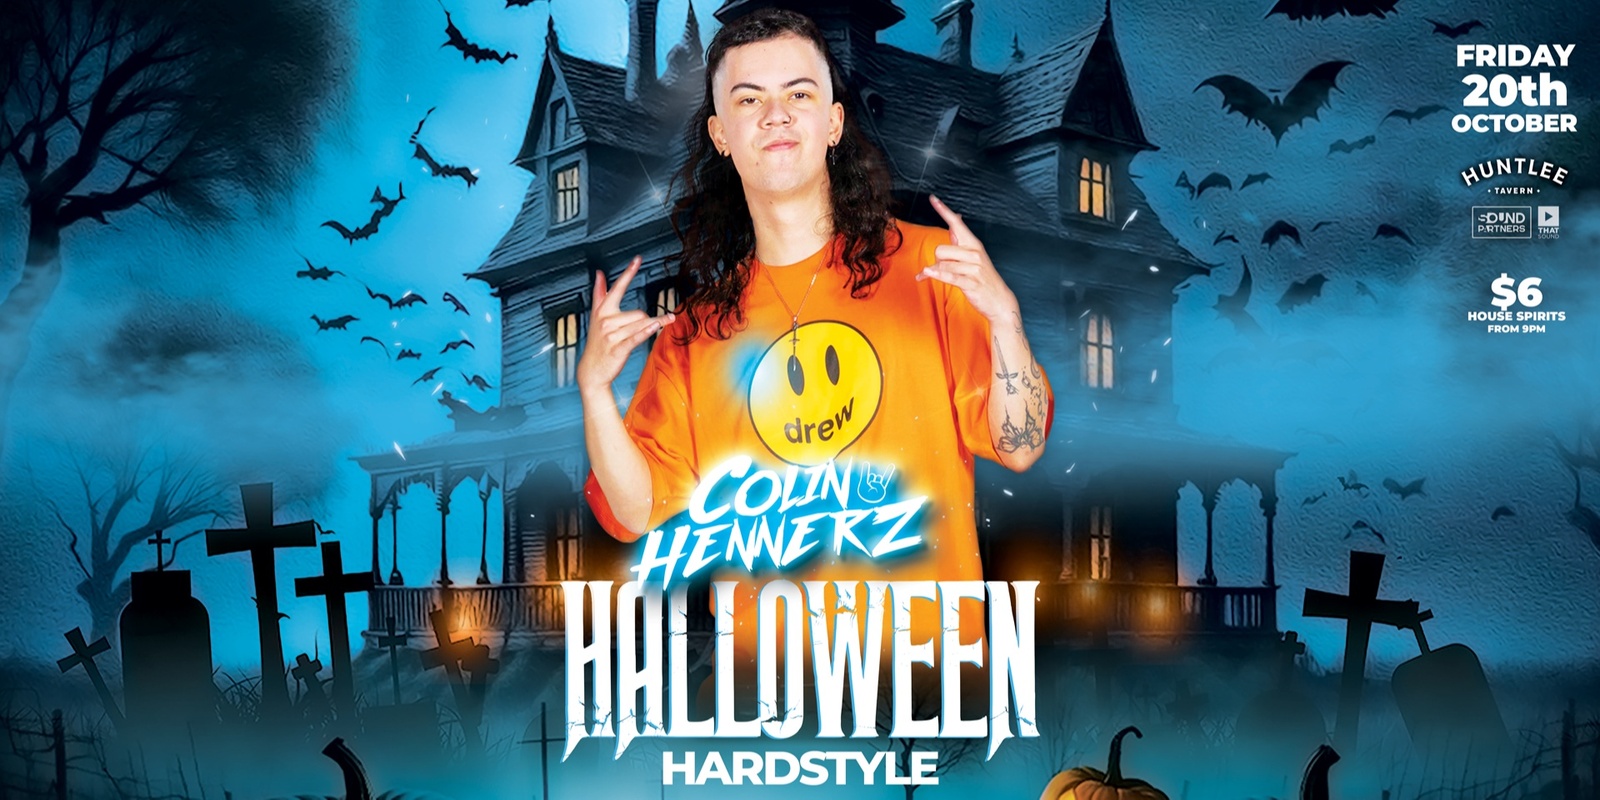 Banner image for Halloween Hardstyle feat Colin Hennerz